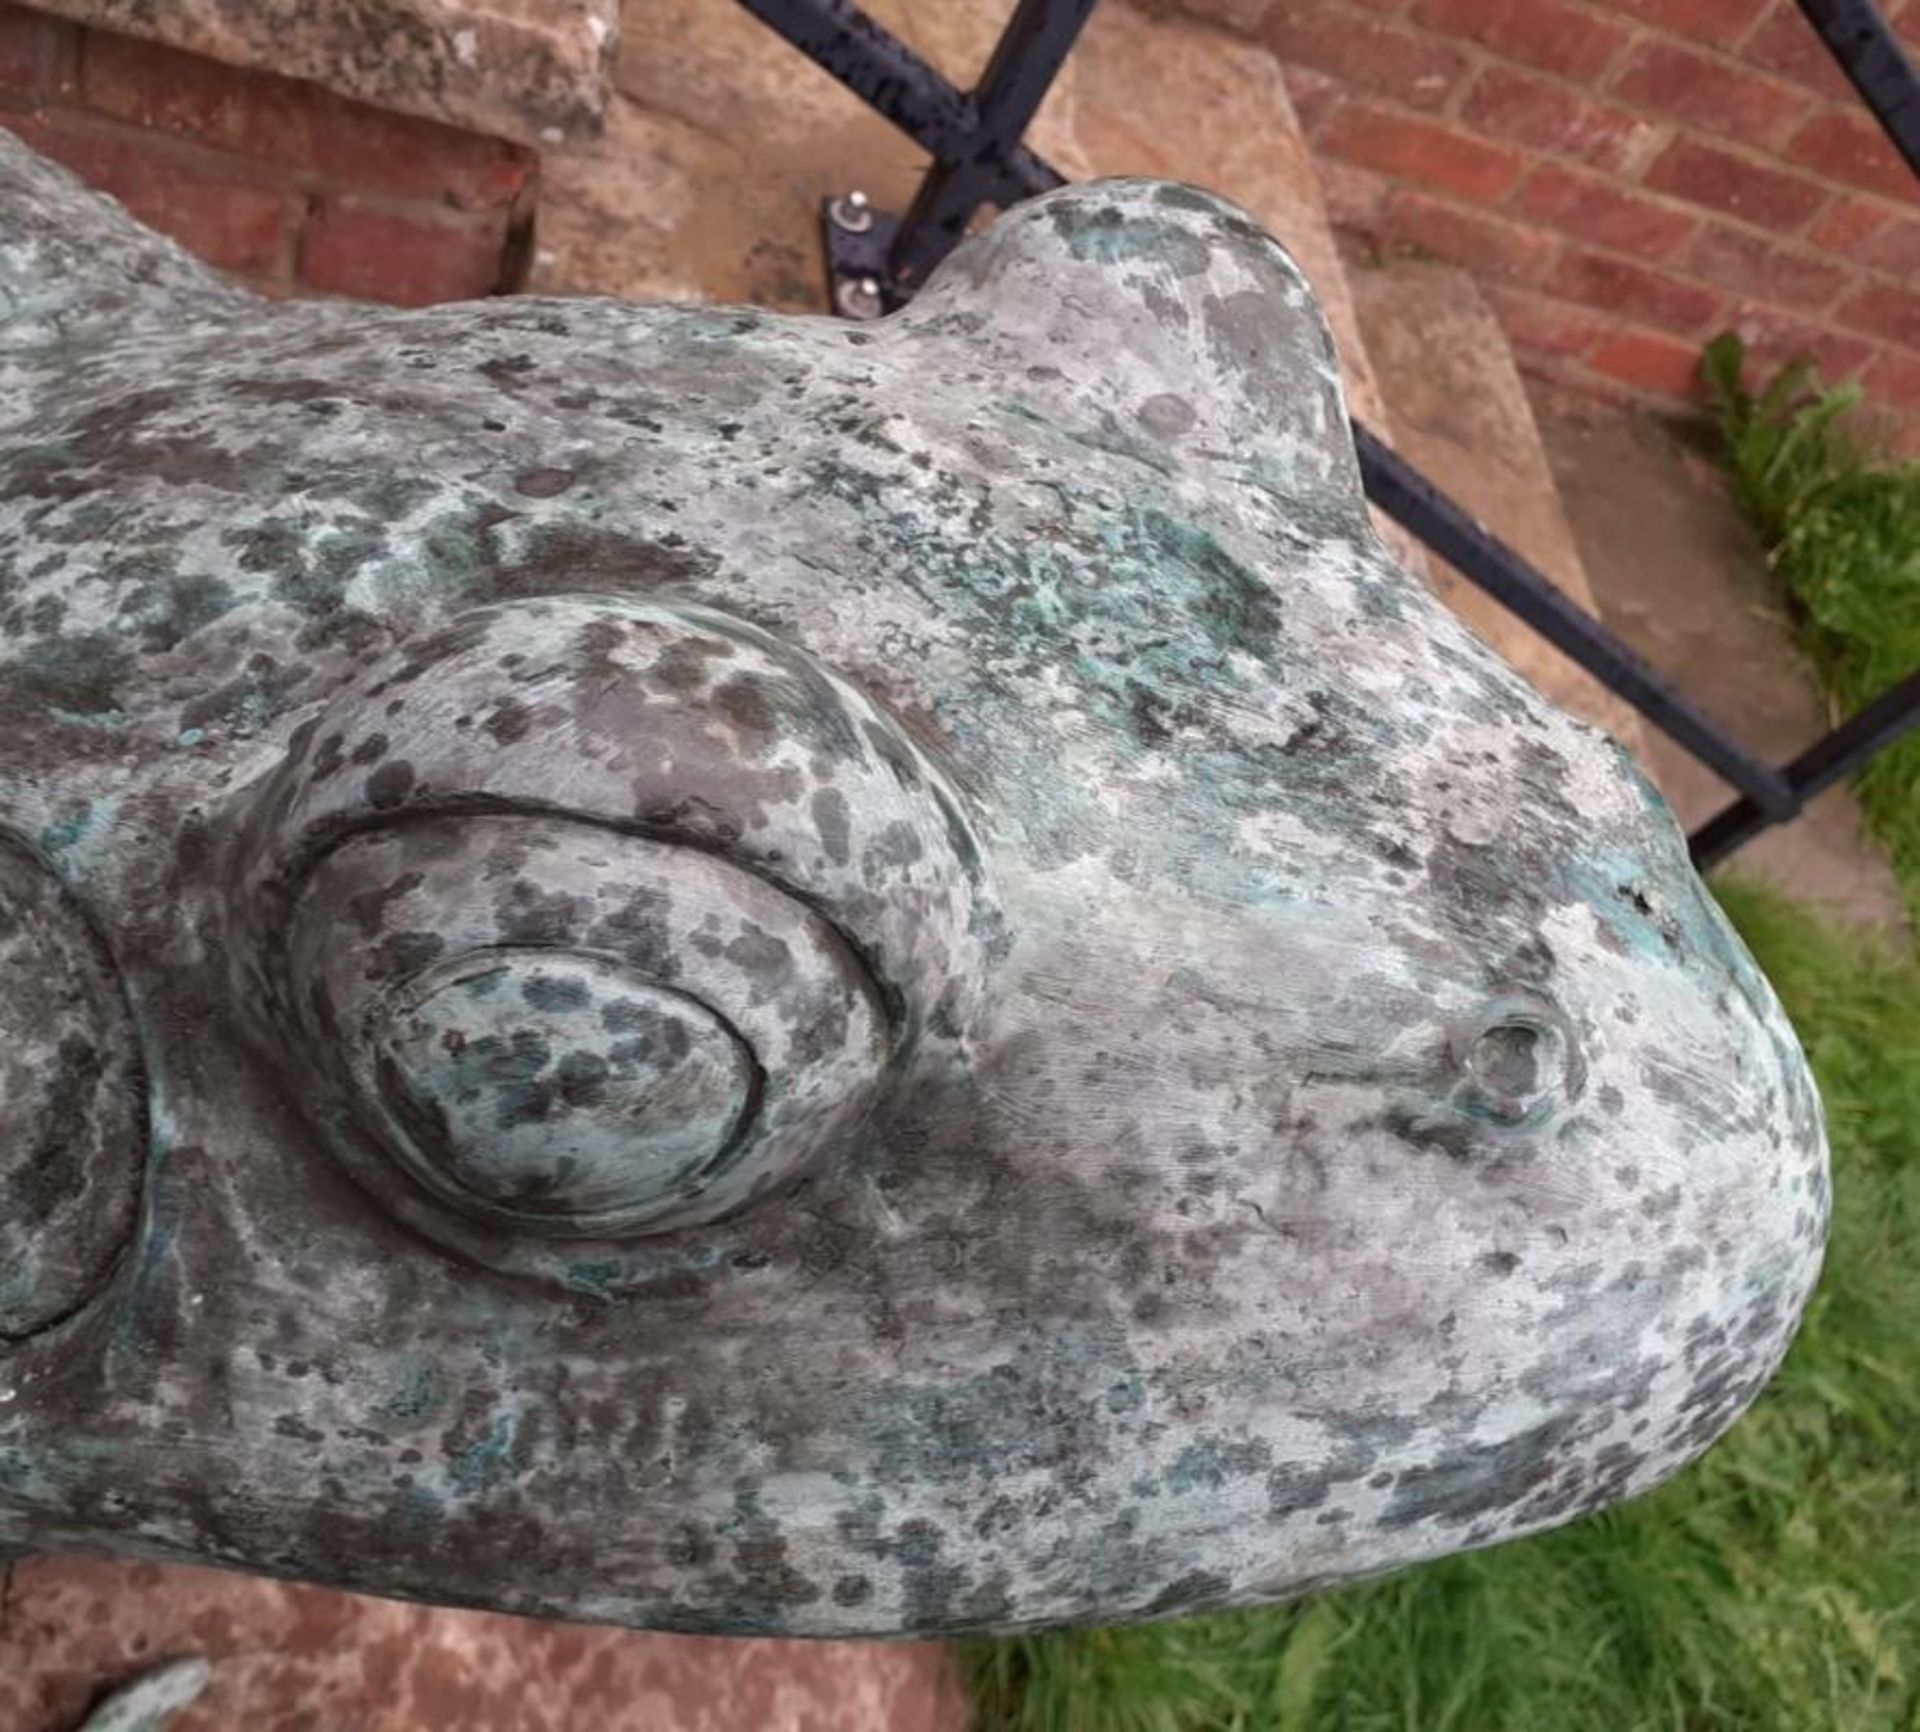 1 x Gigantic Bronze Sculpture of Frog Verdigris Sitting On A Large Rock, With Water Spout In - Image 8 of 8